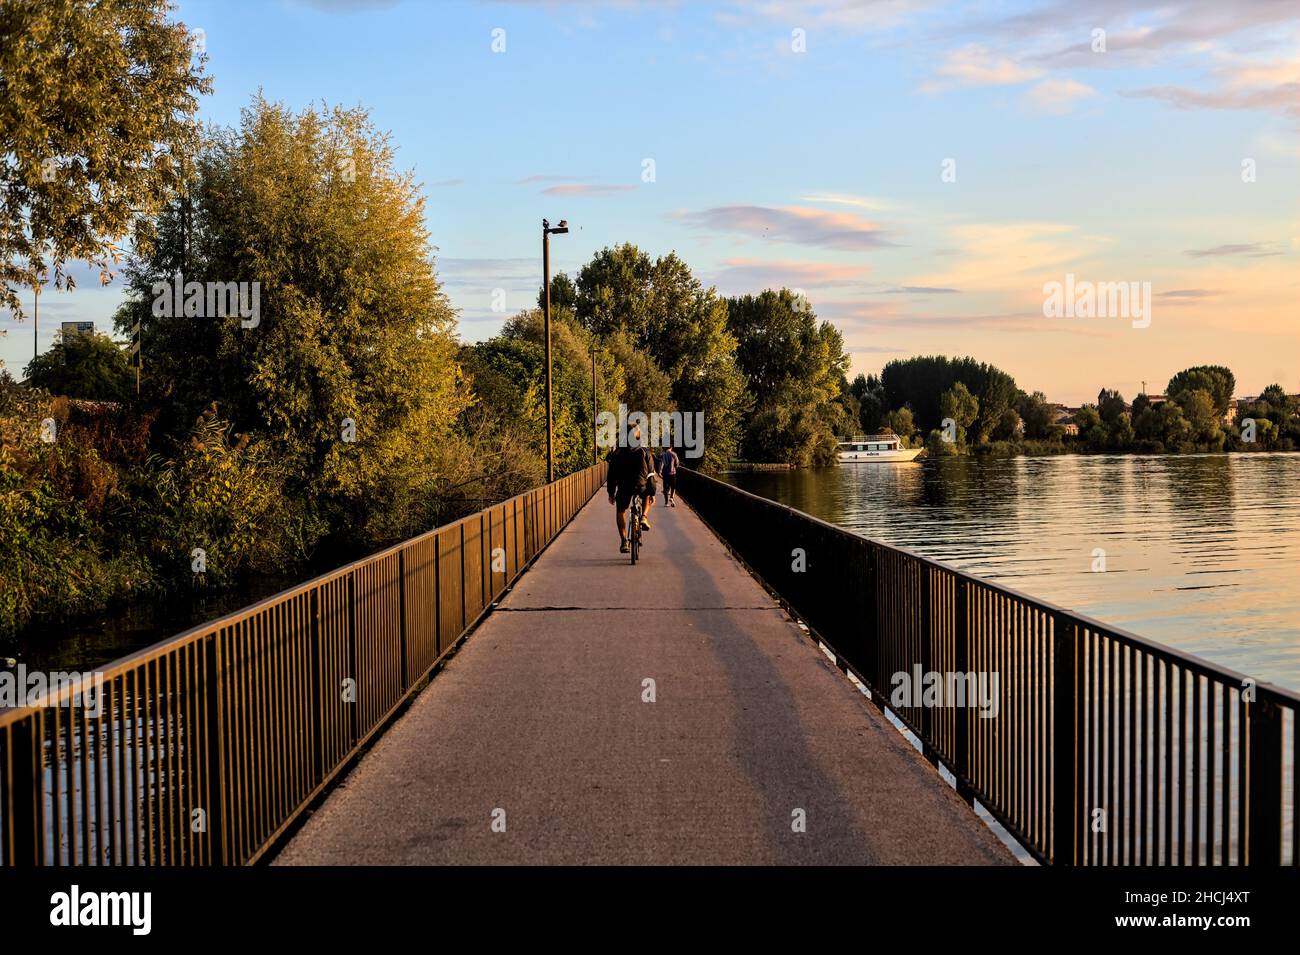 Passageway over a lake at sunset with people strolling by Stock Photo